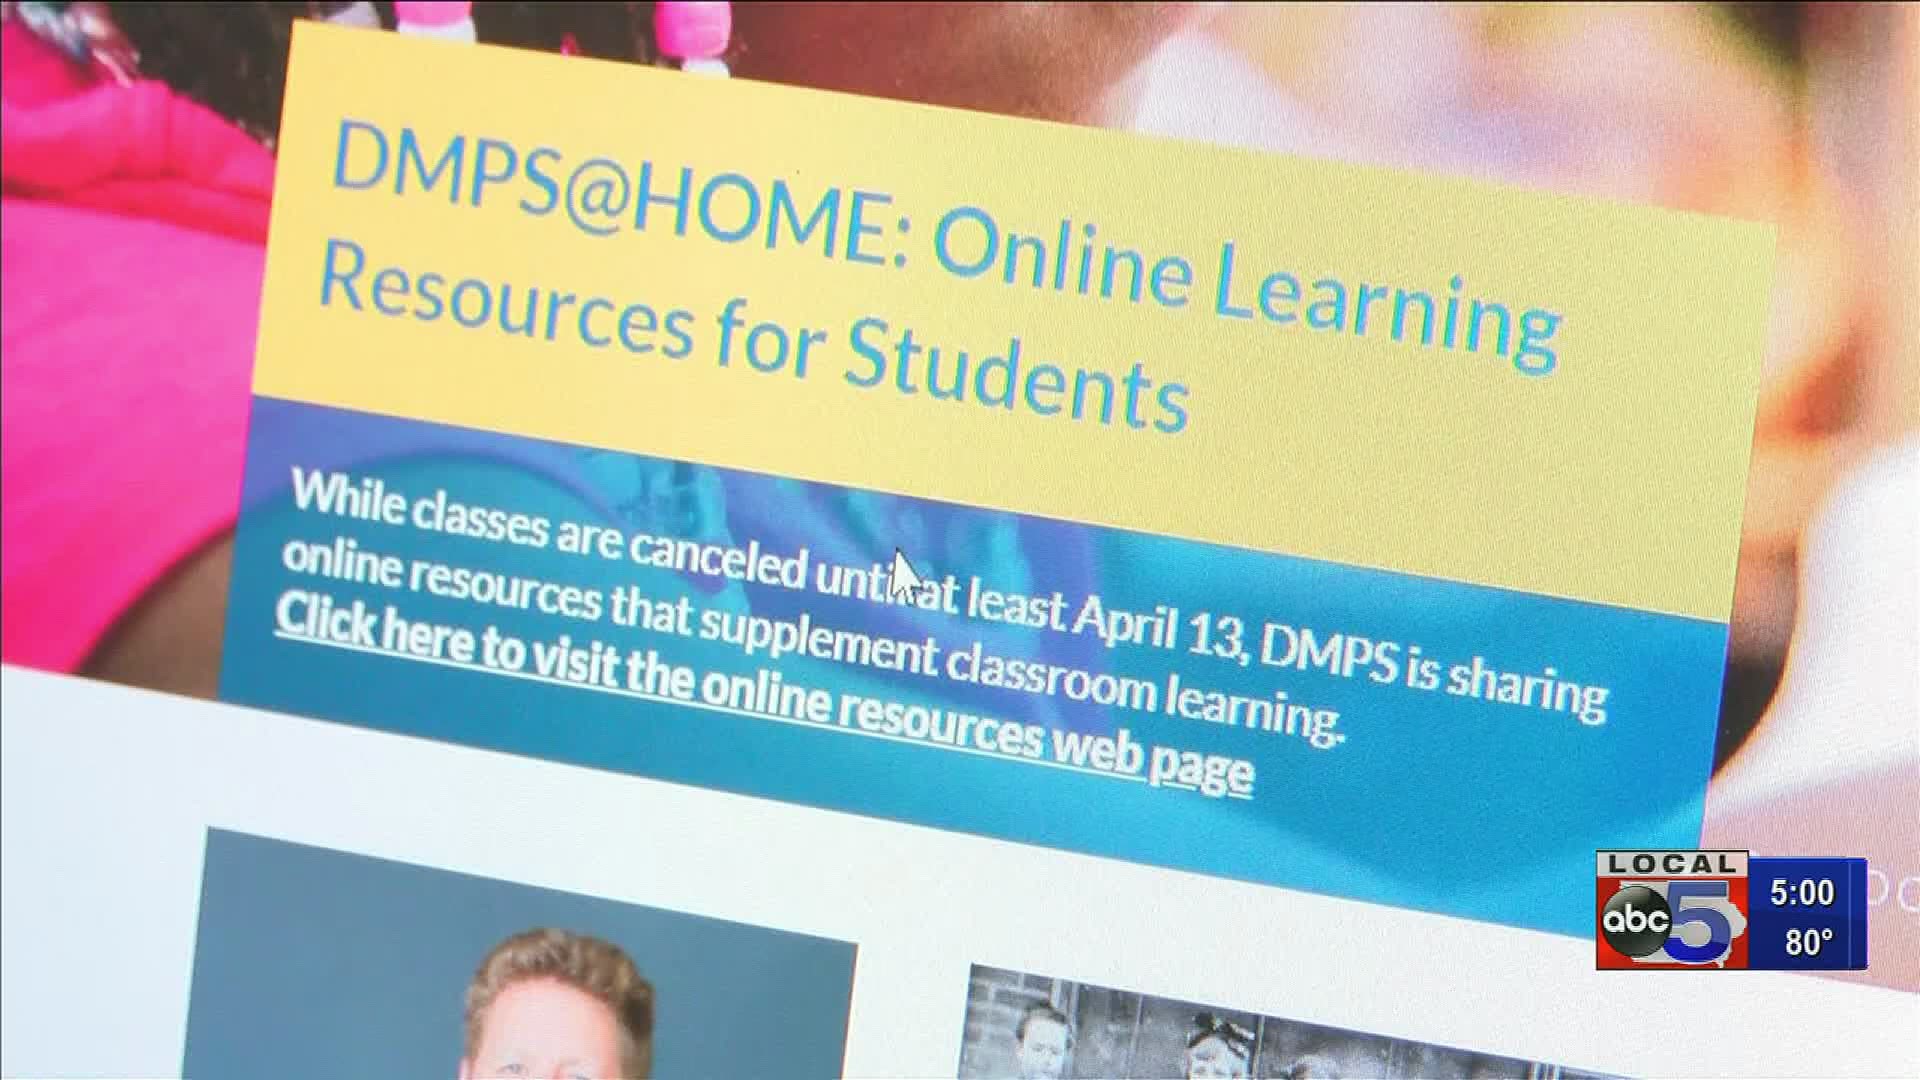 DMPS says they had major concerns with the idea of potentially coming back to school on April 30, so they took matters into their own hands.